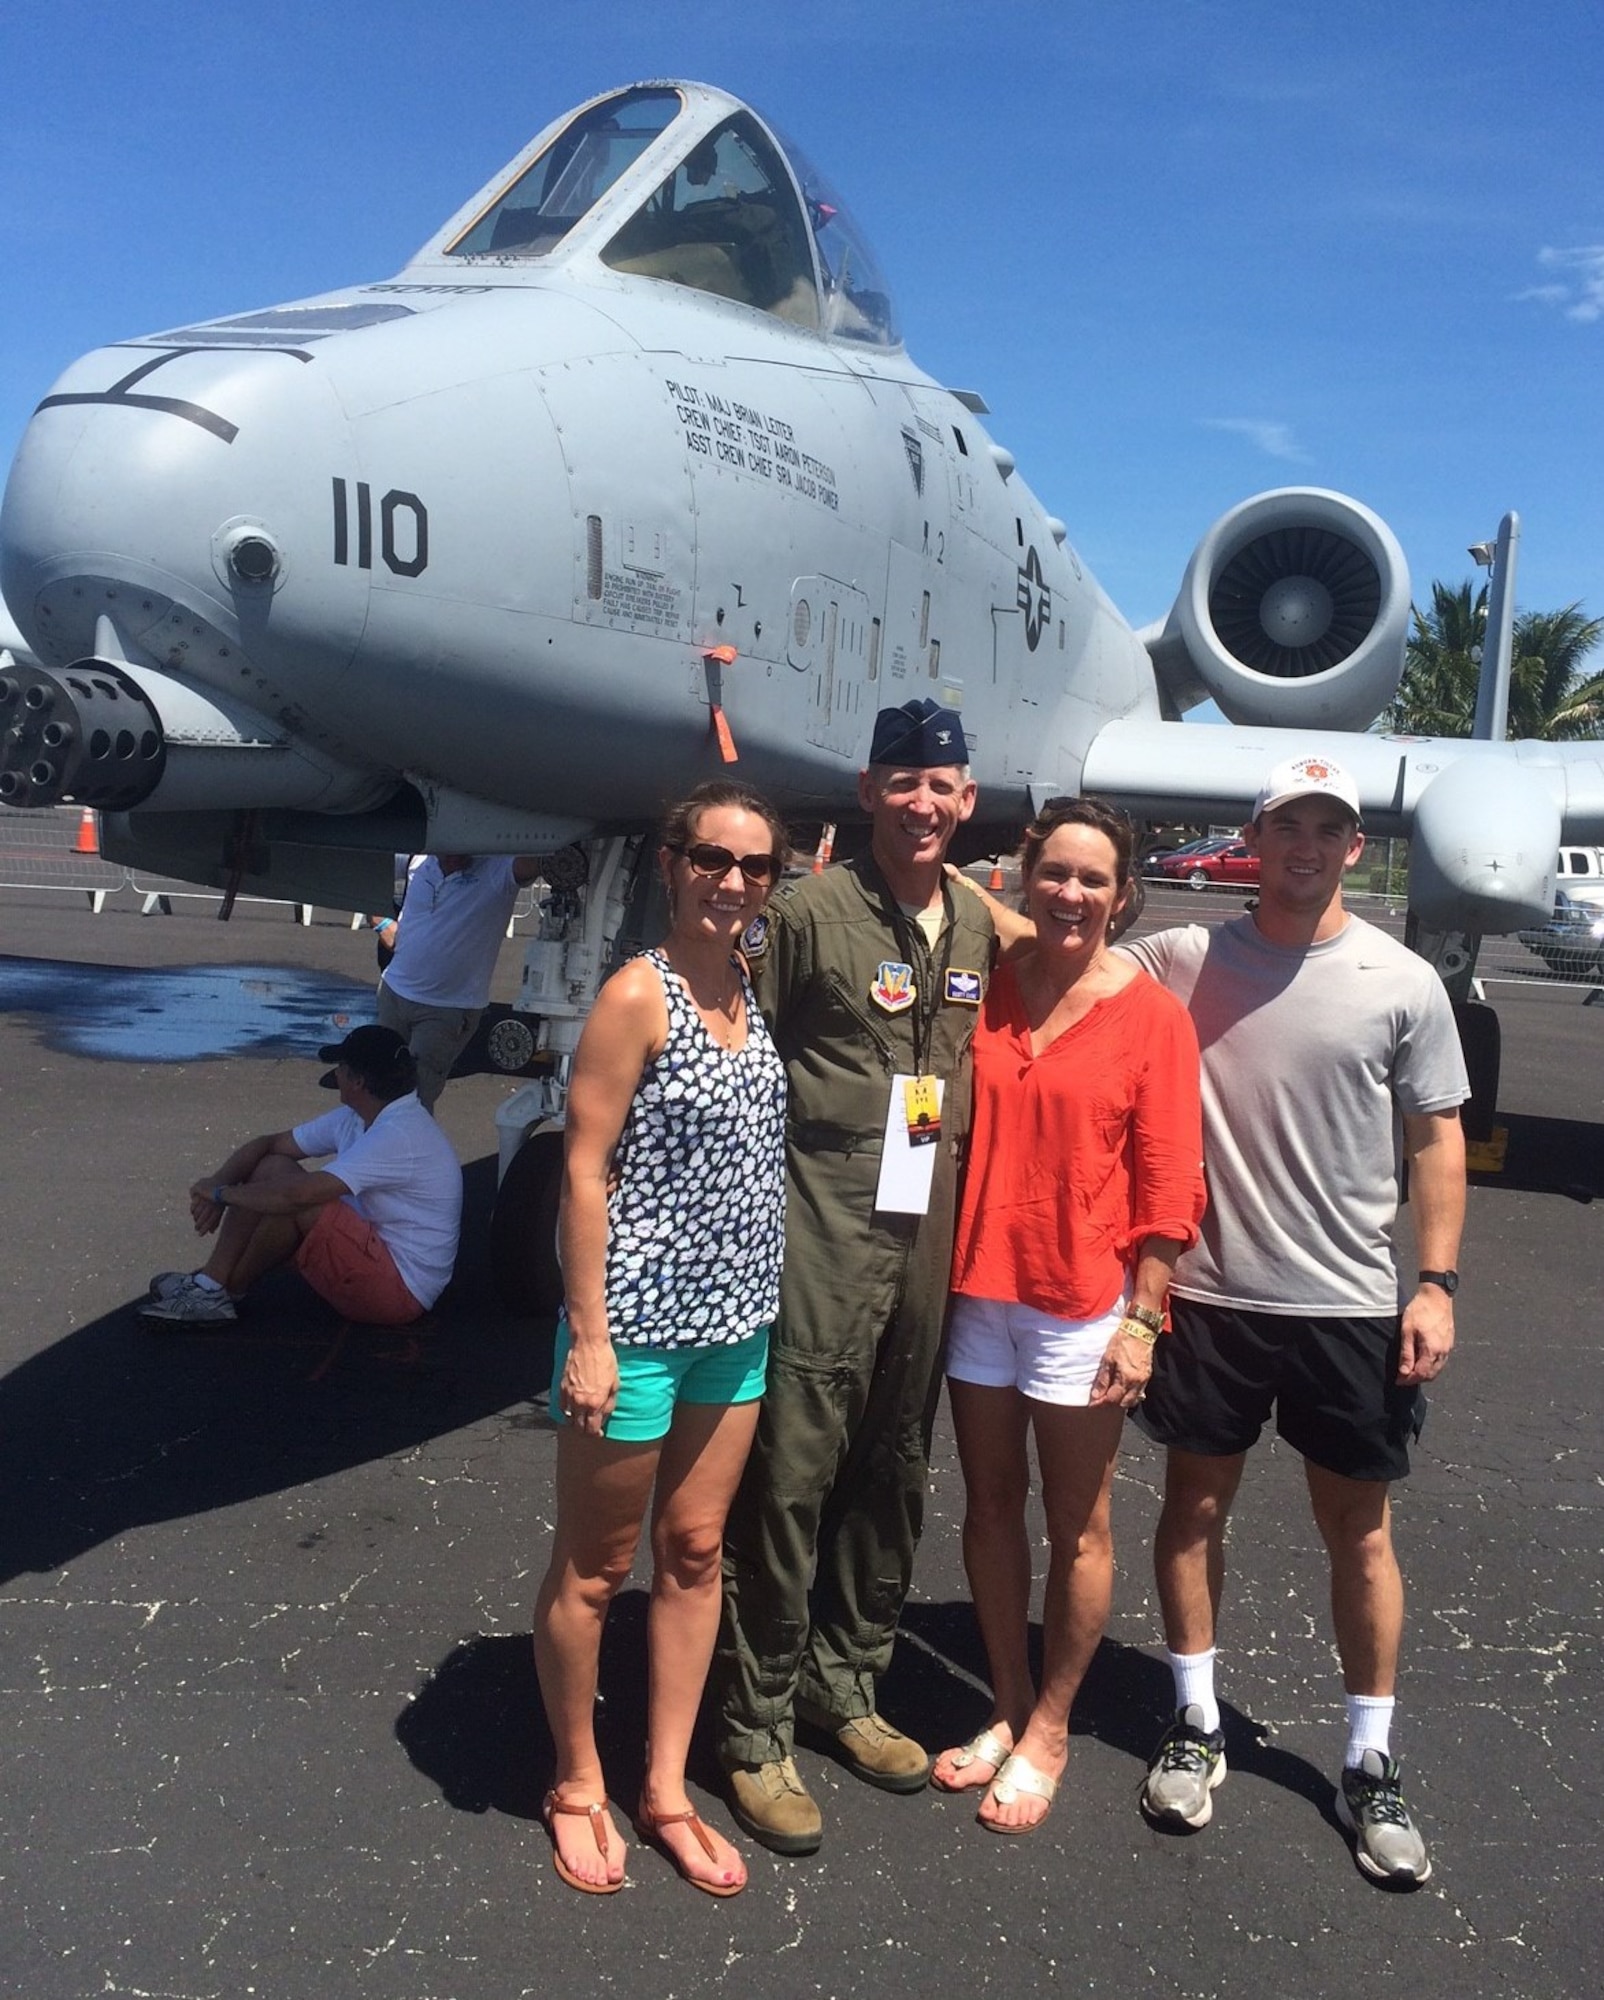 Col. Scott Caine, 9th Air Force vice commander, his wife, Pam, and two of their three children, Mark and Elizabeth, stand next to an A-10 Thunderbolt II at the Vero Beach Air Show, June 25, 2016. Caine had the opportunity to tell community members about the Air Force and thank them for their support. Scott and Pam Caine are from the area and both graduated from Vero Beach High School. (Courtesy photo)